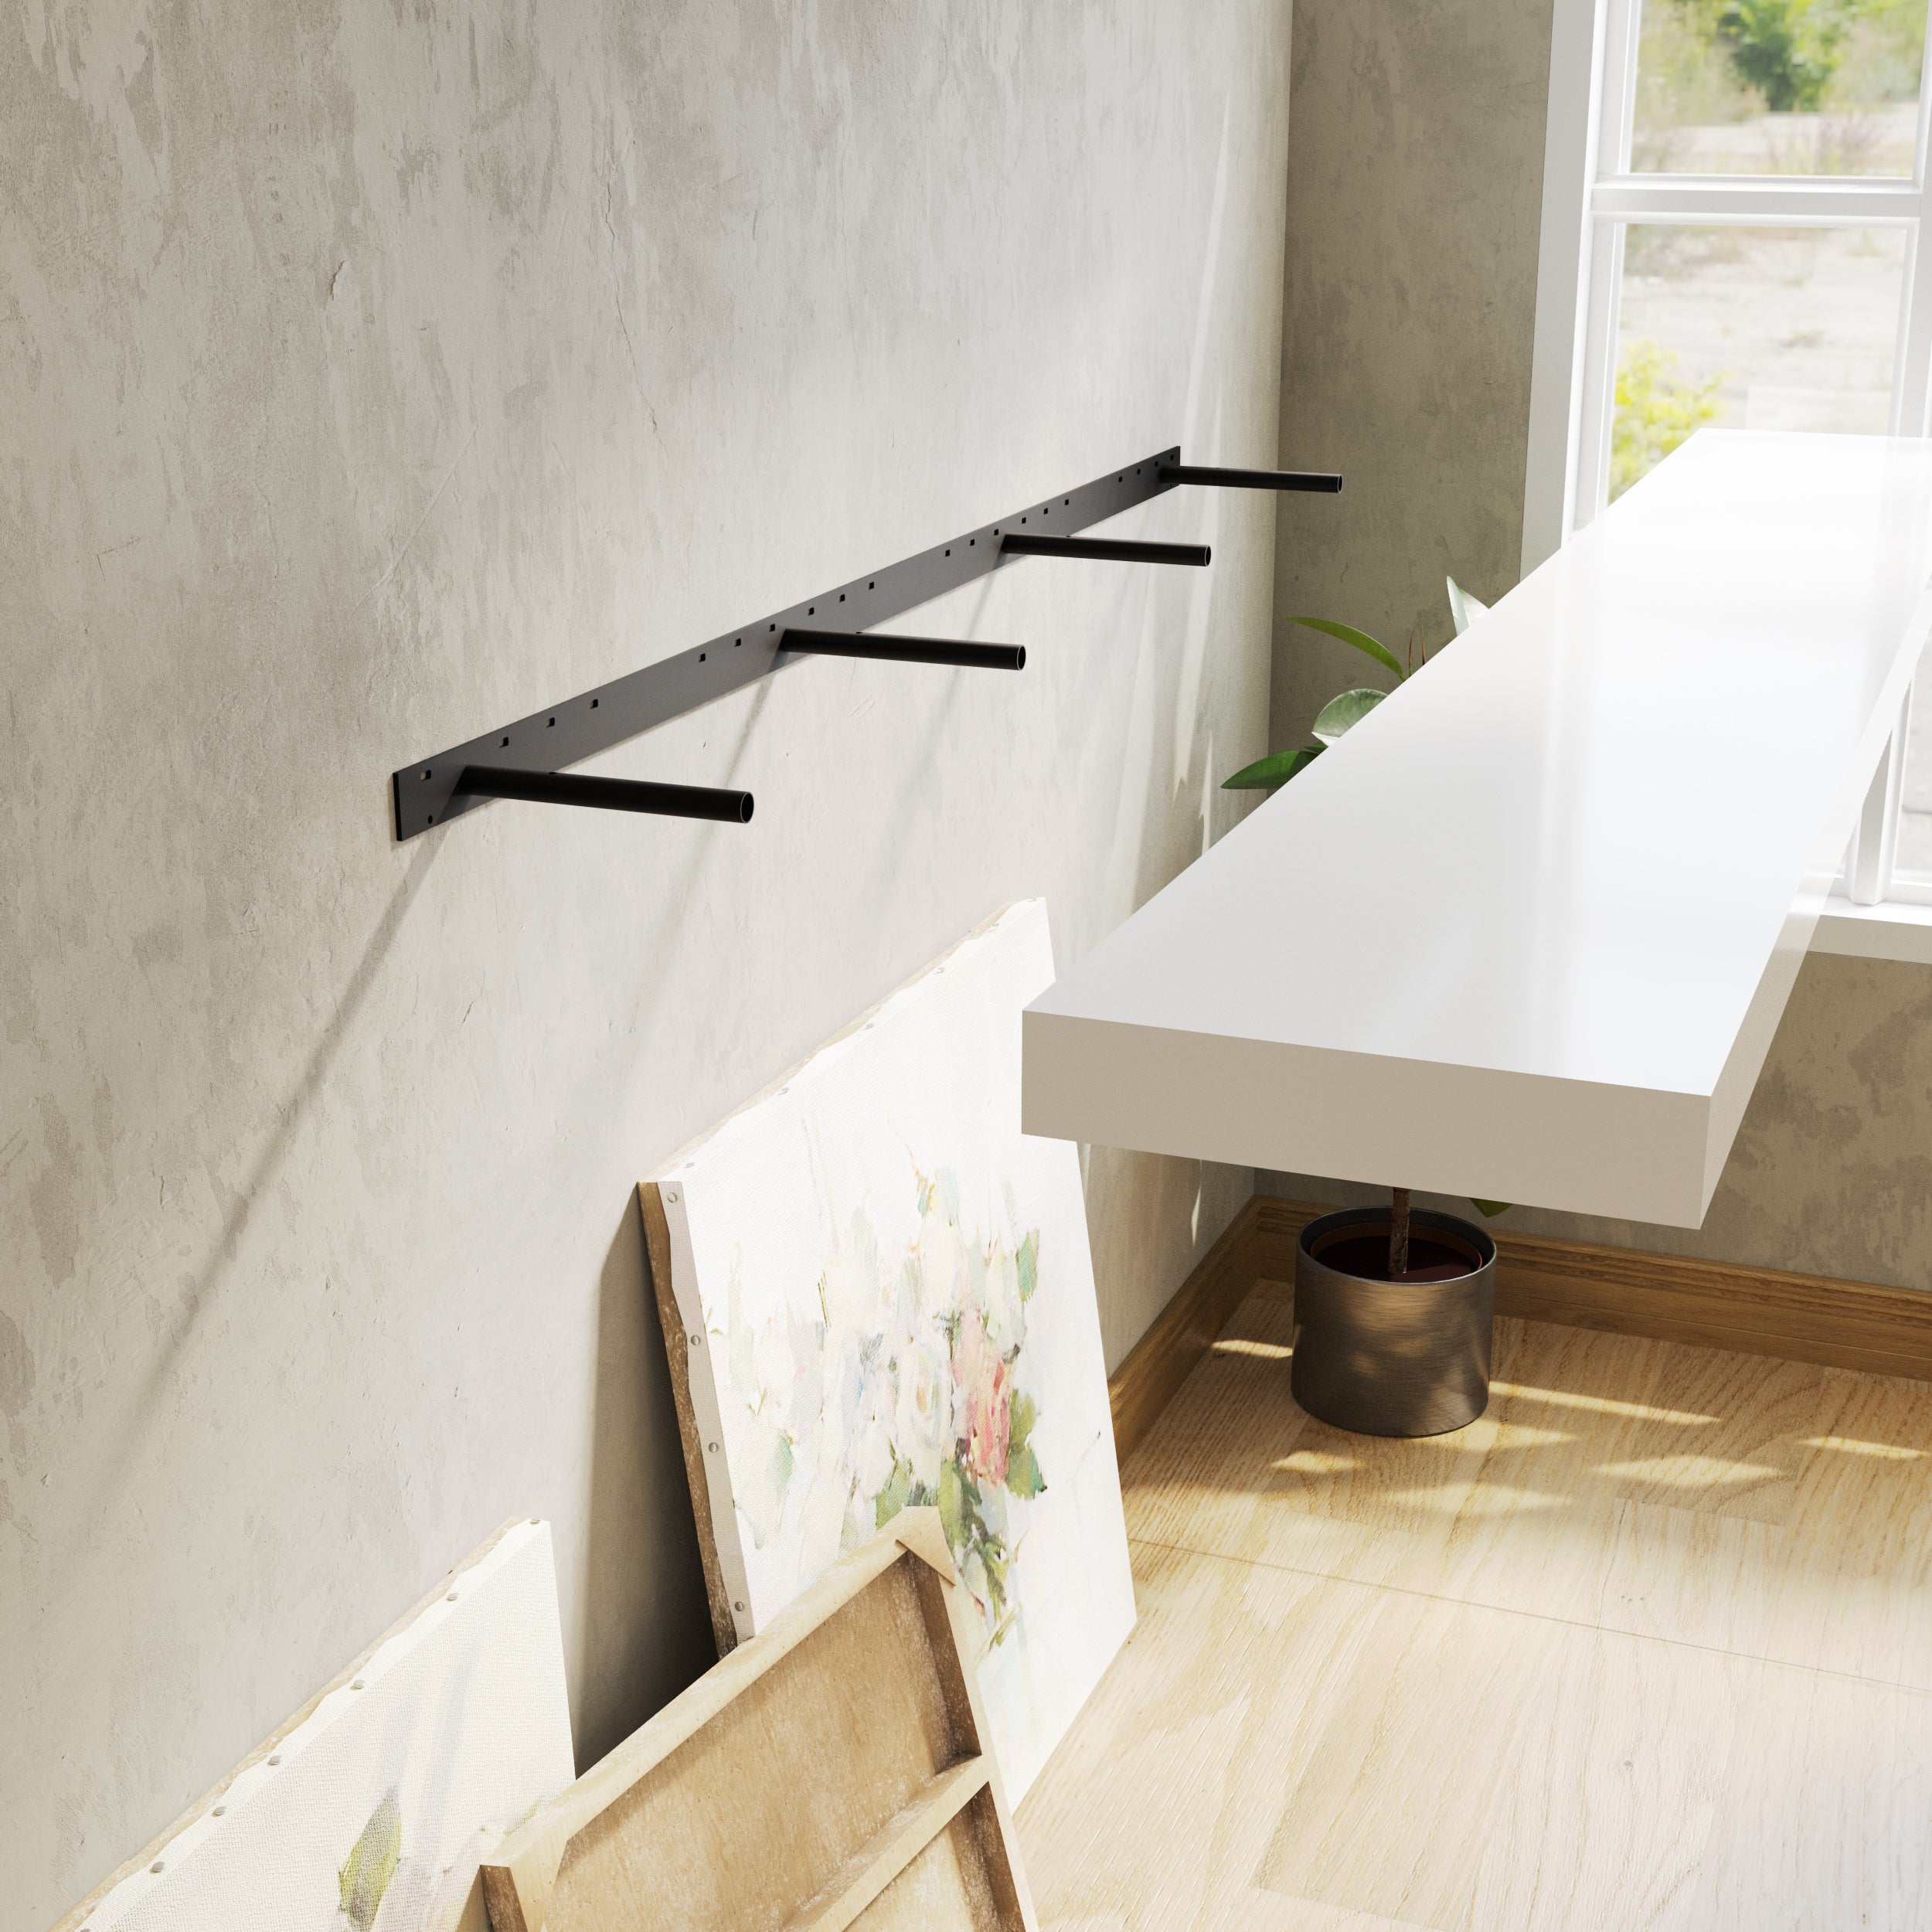 Bare wall mounted brackets holding a white floating shelf, hinting at a clean and modern setup.